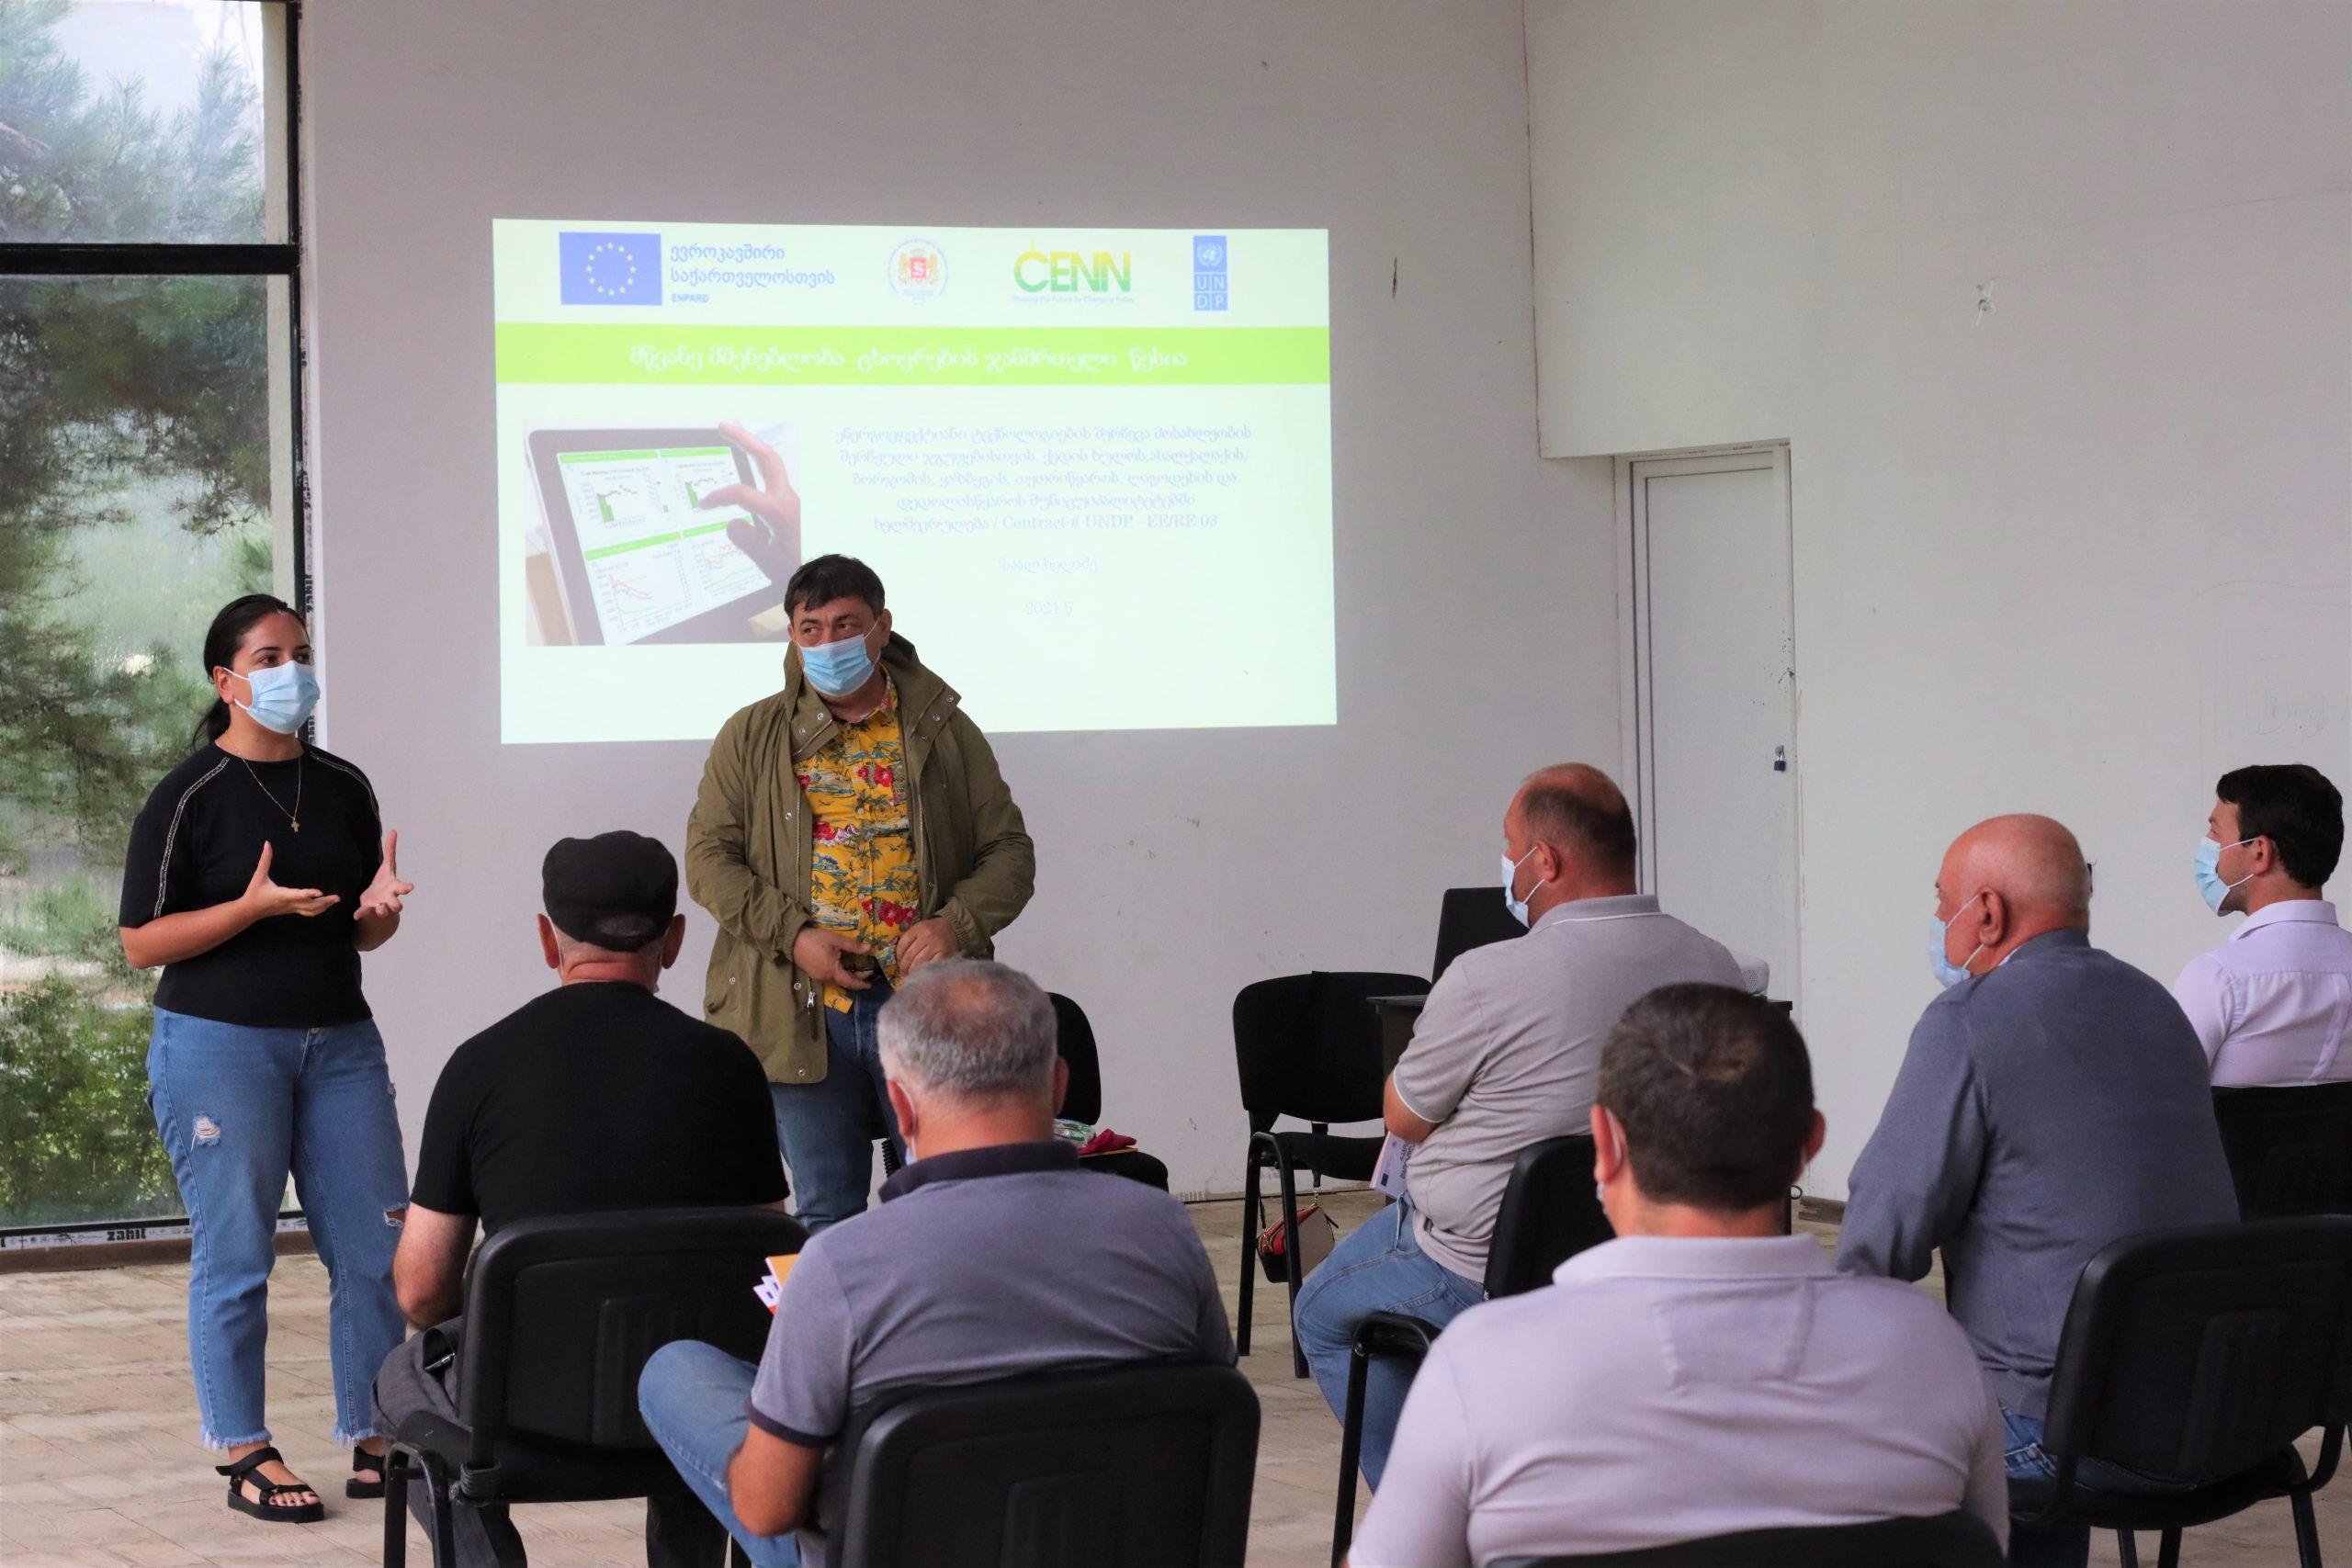 CENN Launched Community Mobilization Meeting in the Regions